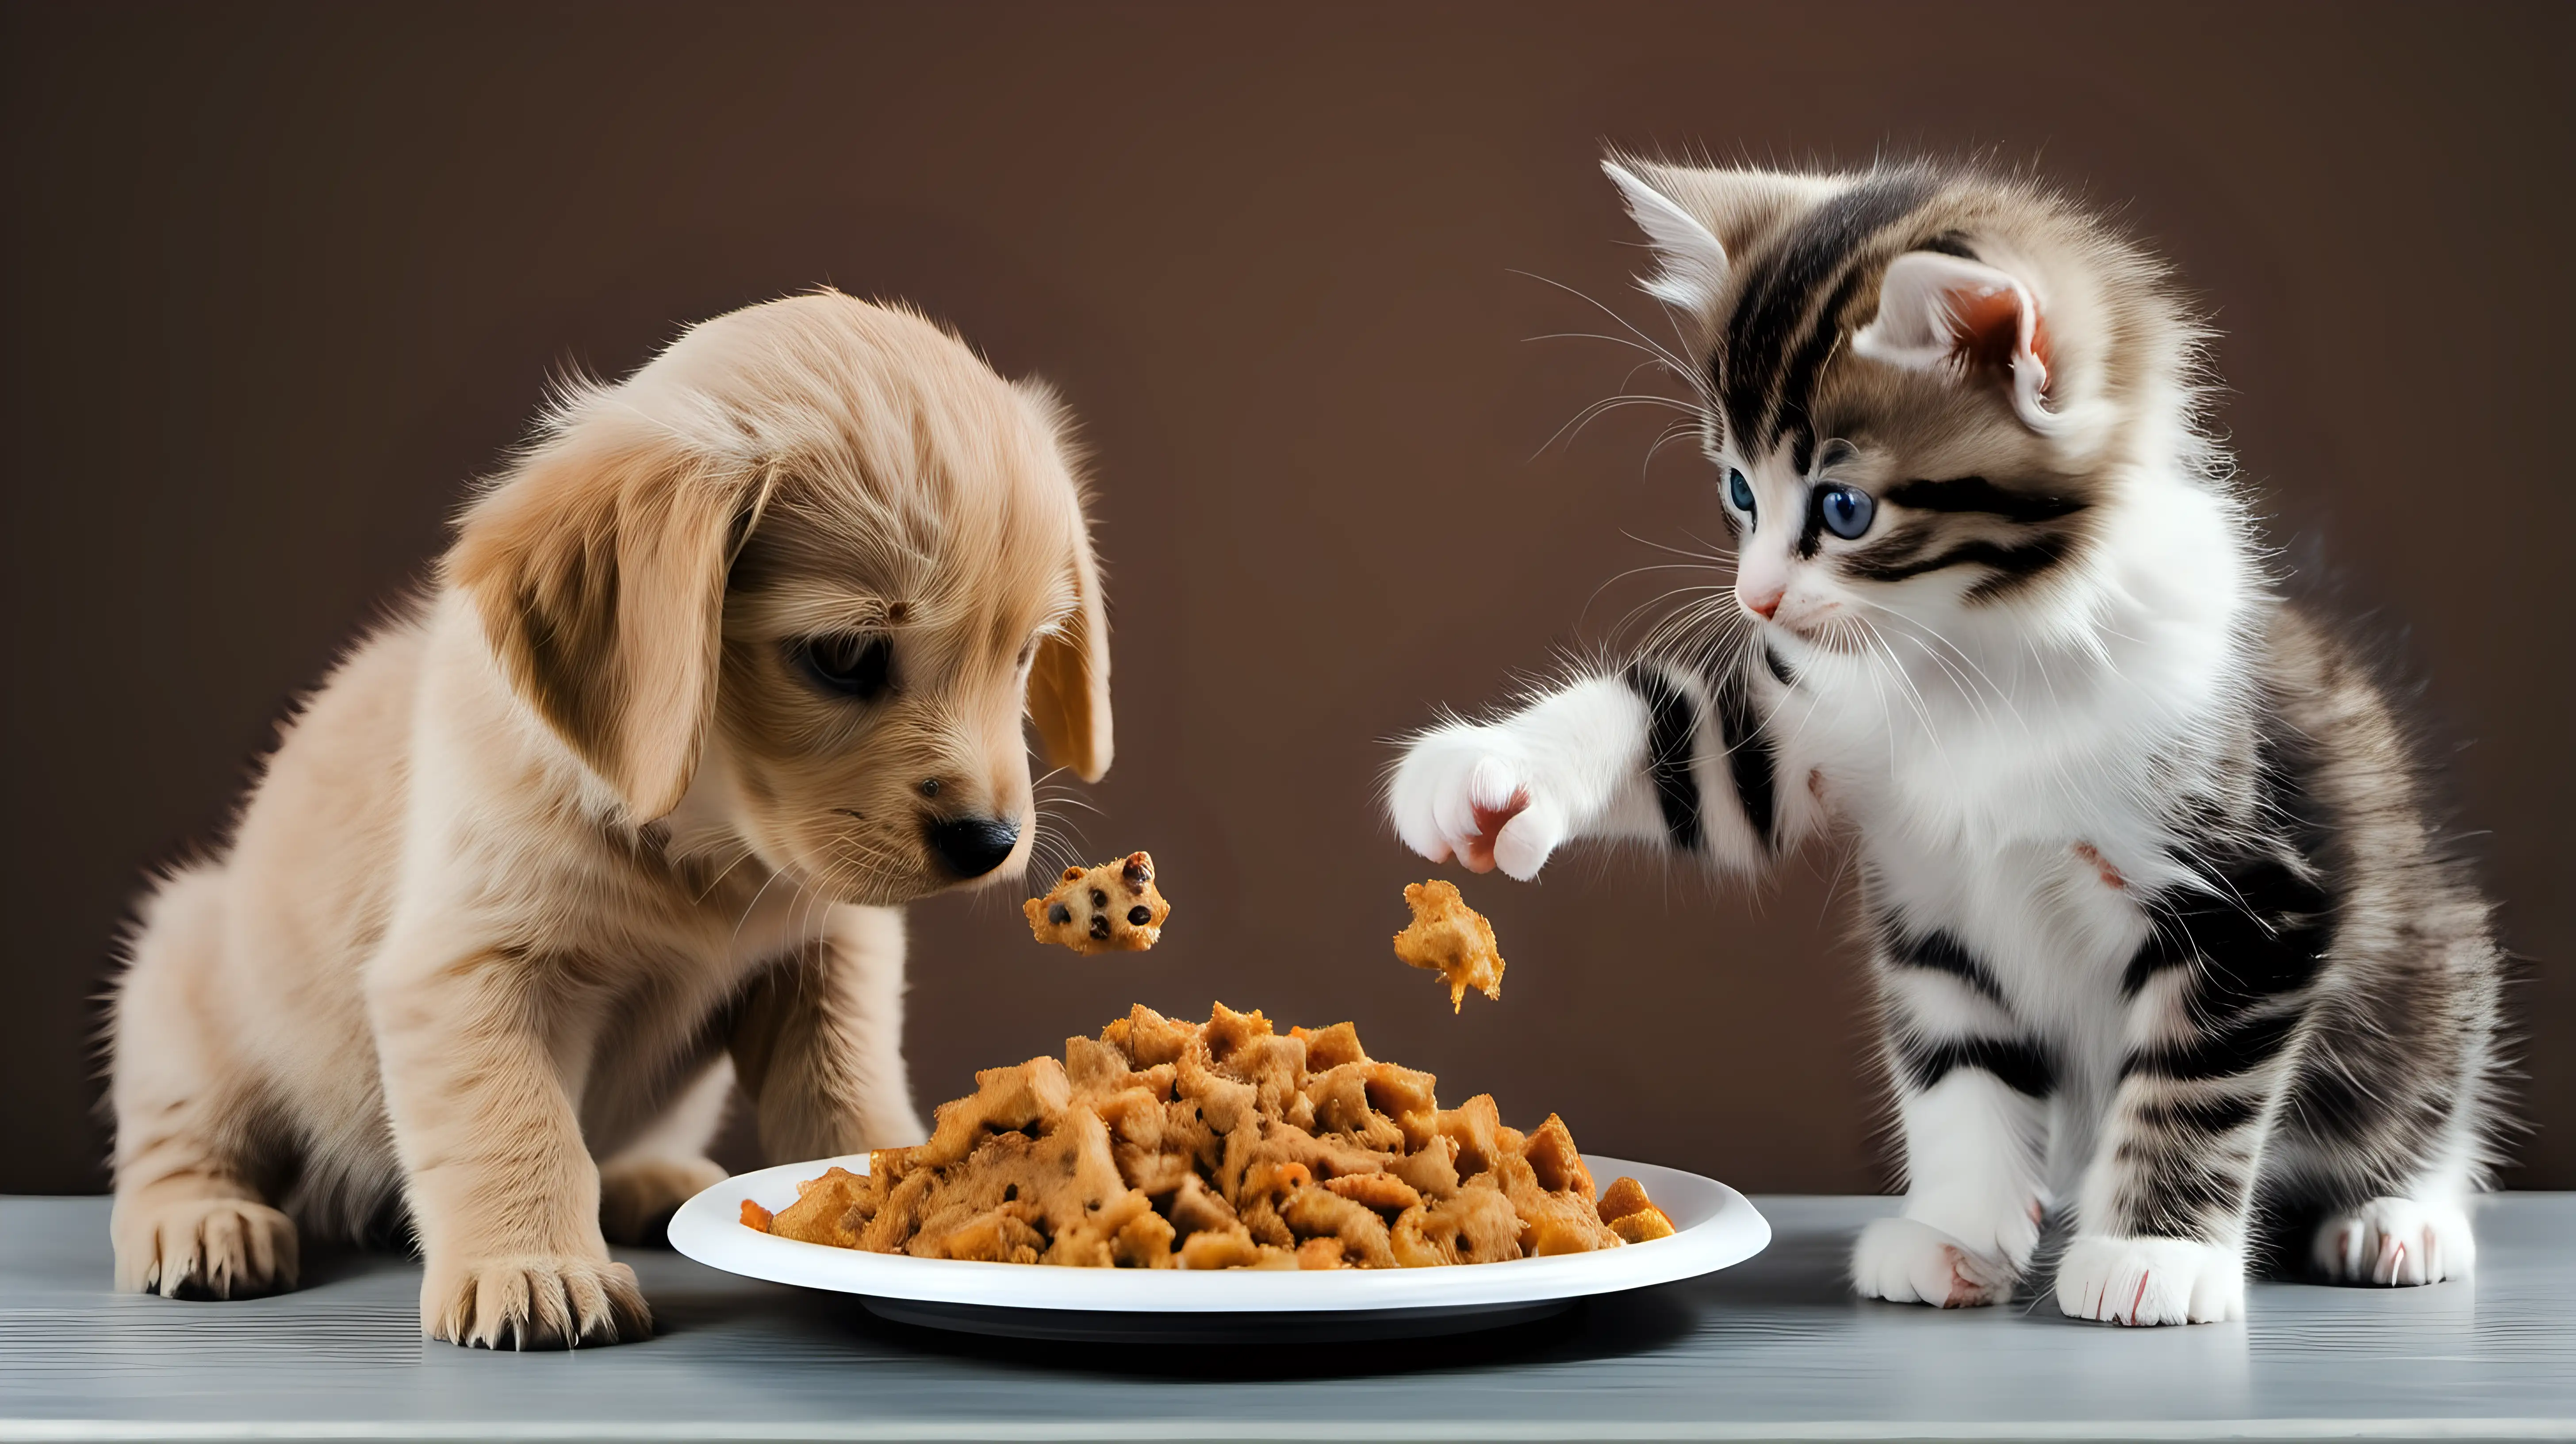 puppy and kitten eating food on the table, isolated on background